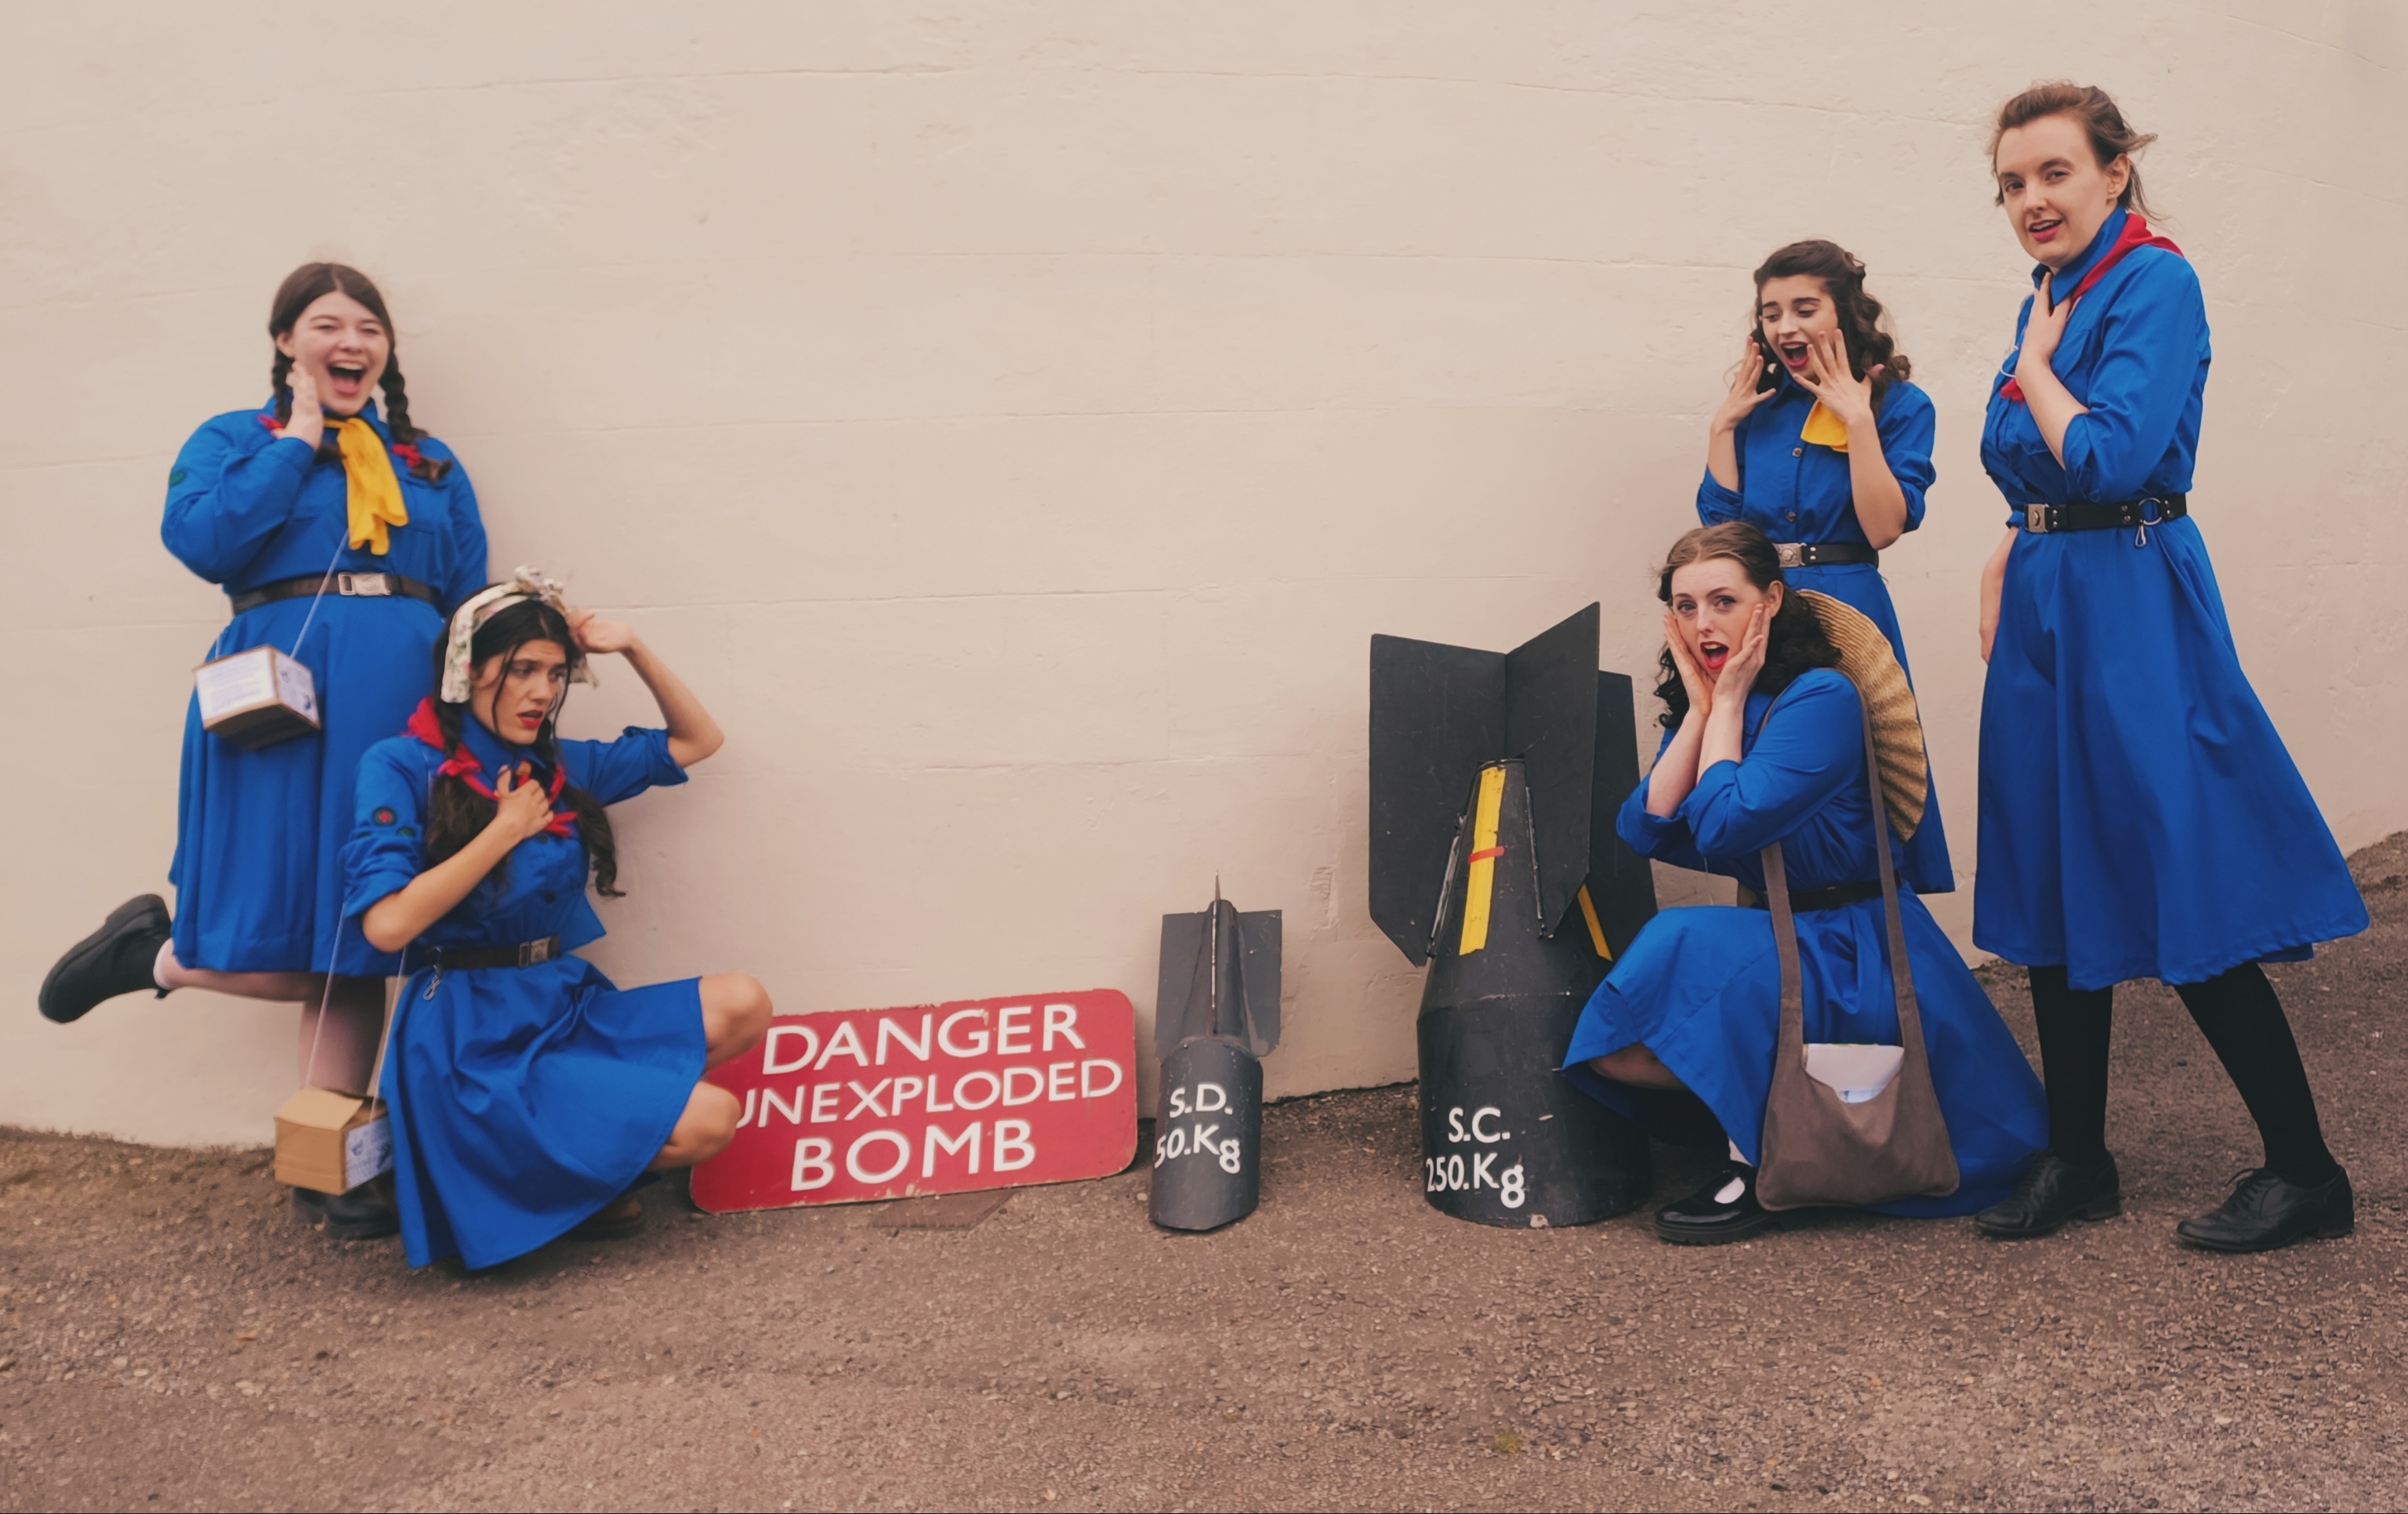 Girl Guides with two unexploded bombs